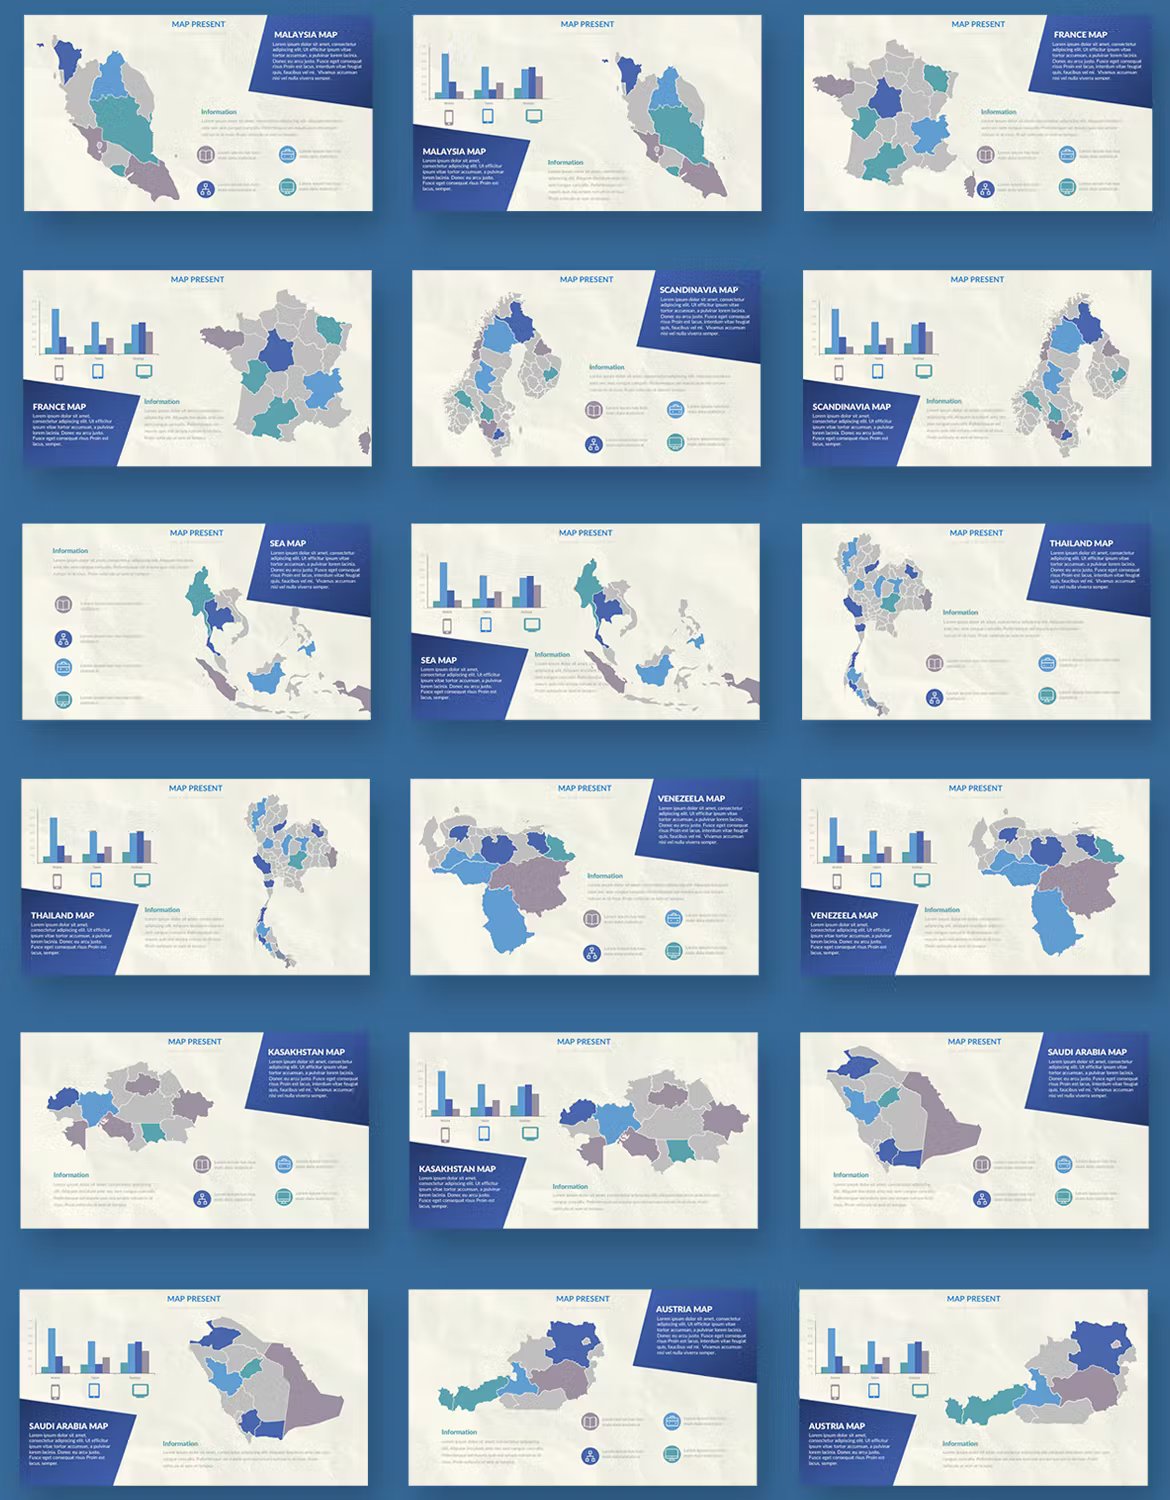 A set of 18 different assign powerpoint templates in blue, gray, green and white on a blue background.